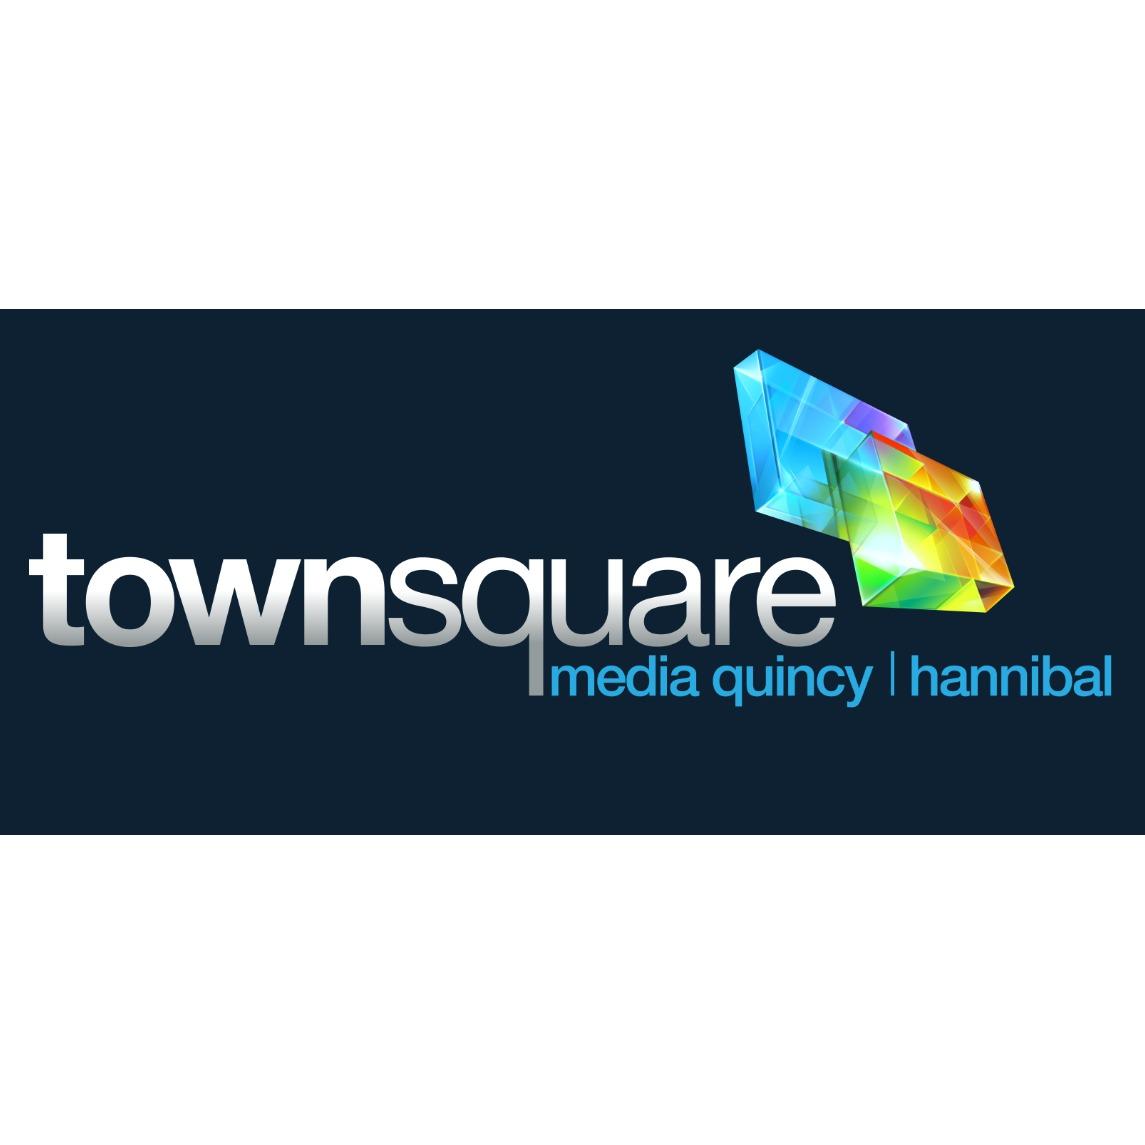 Townsquare Media Quincy/Hannibal Photo